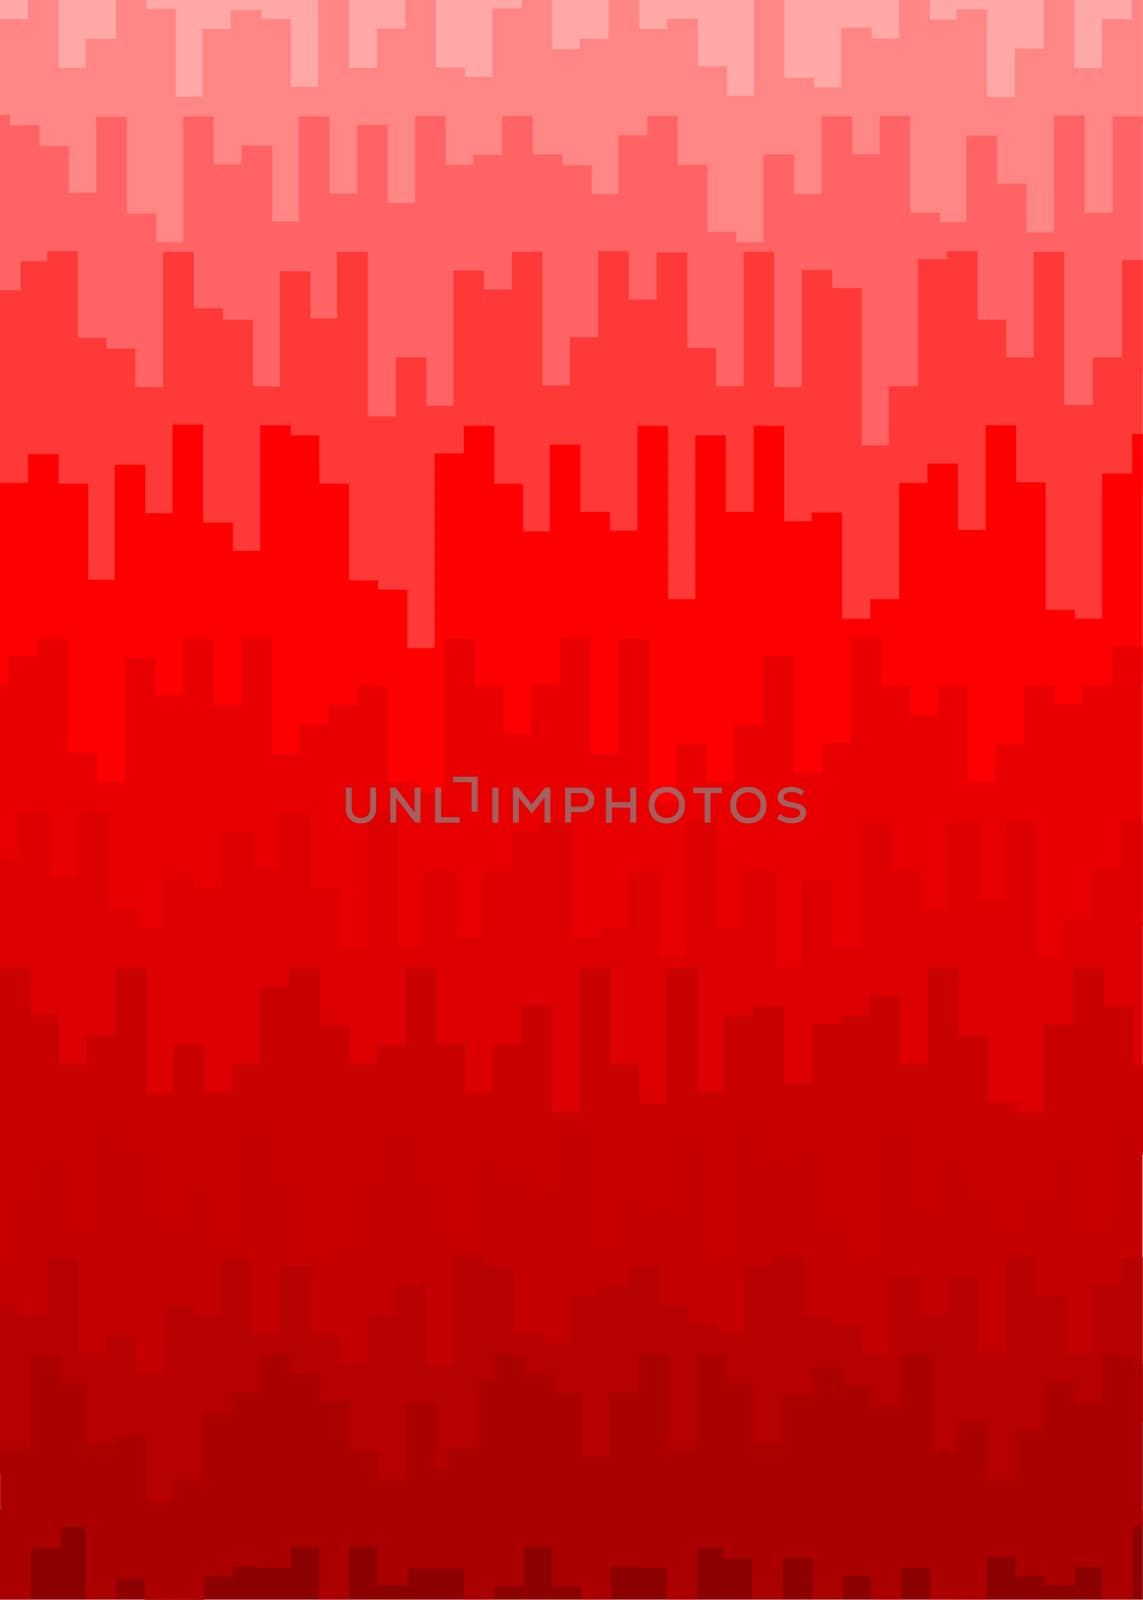 A red backdrop made up of fadingb red blocks.